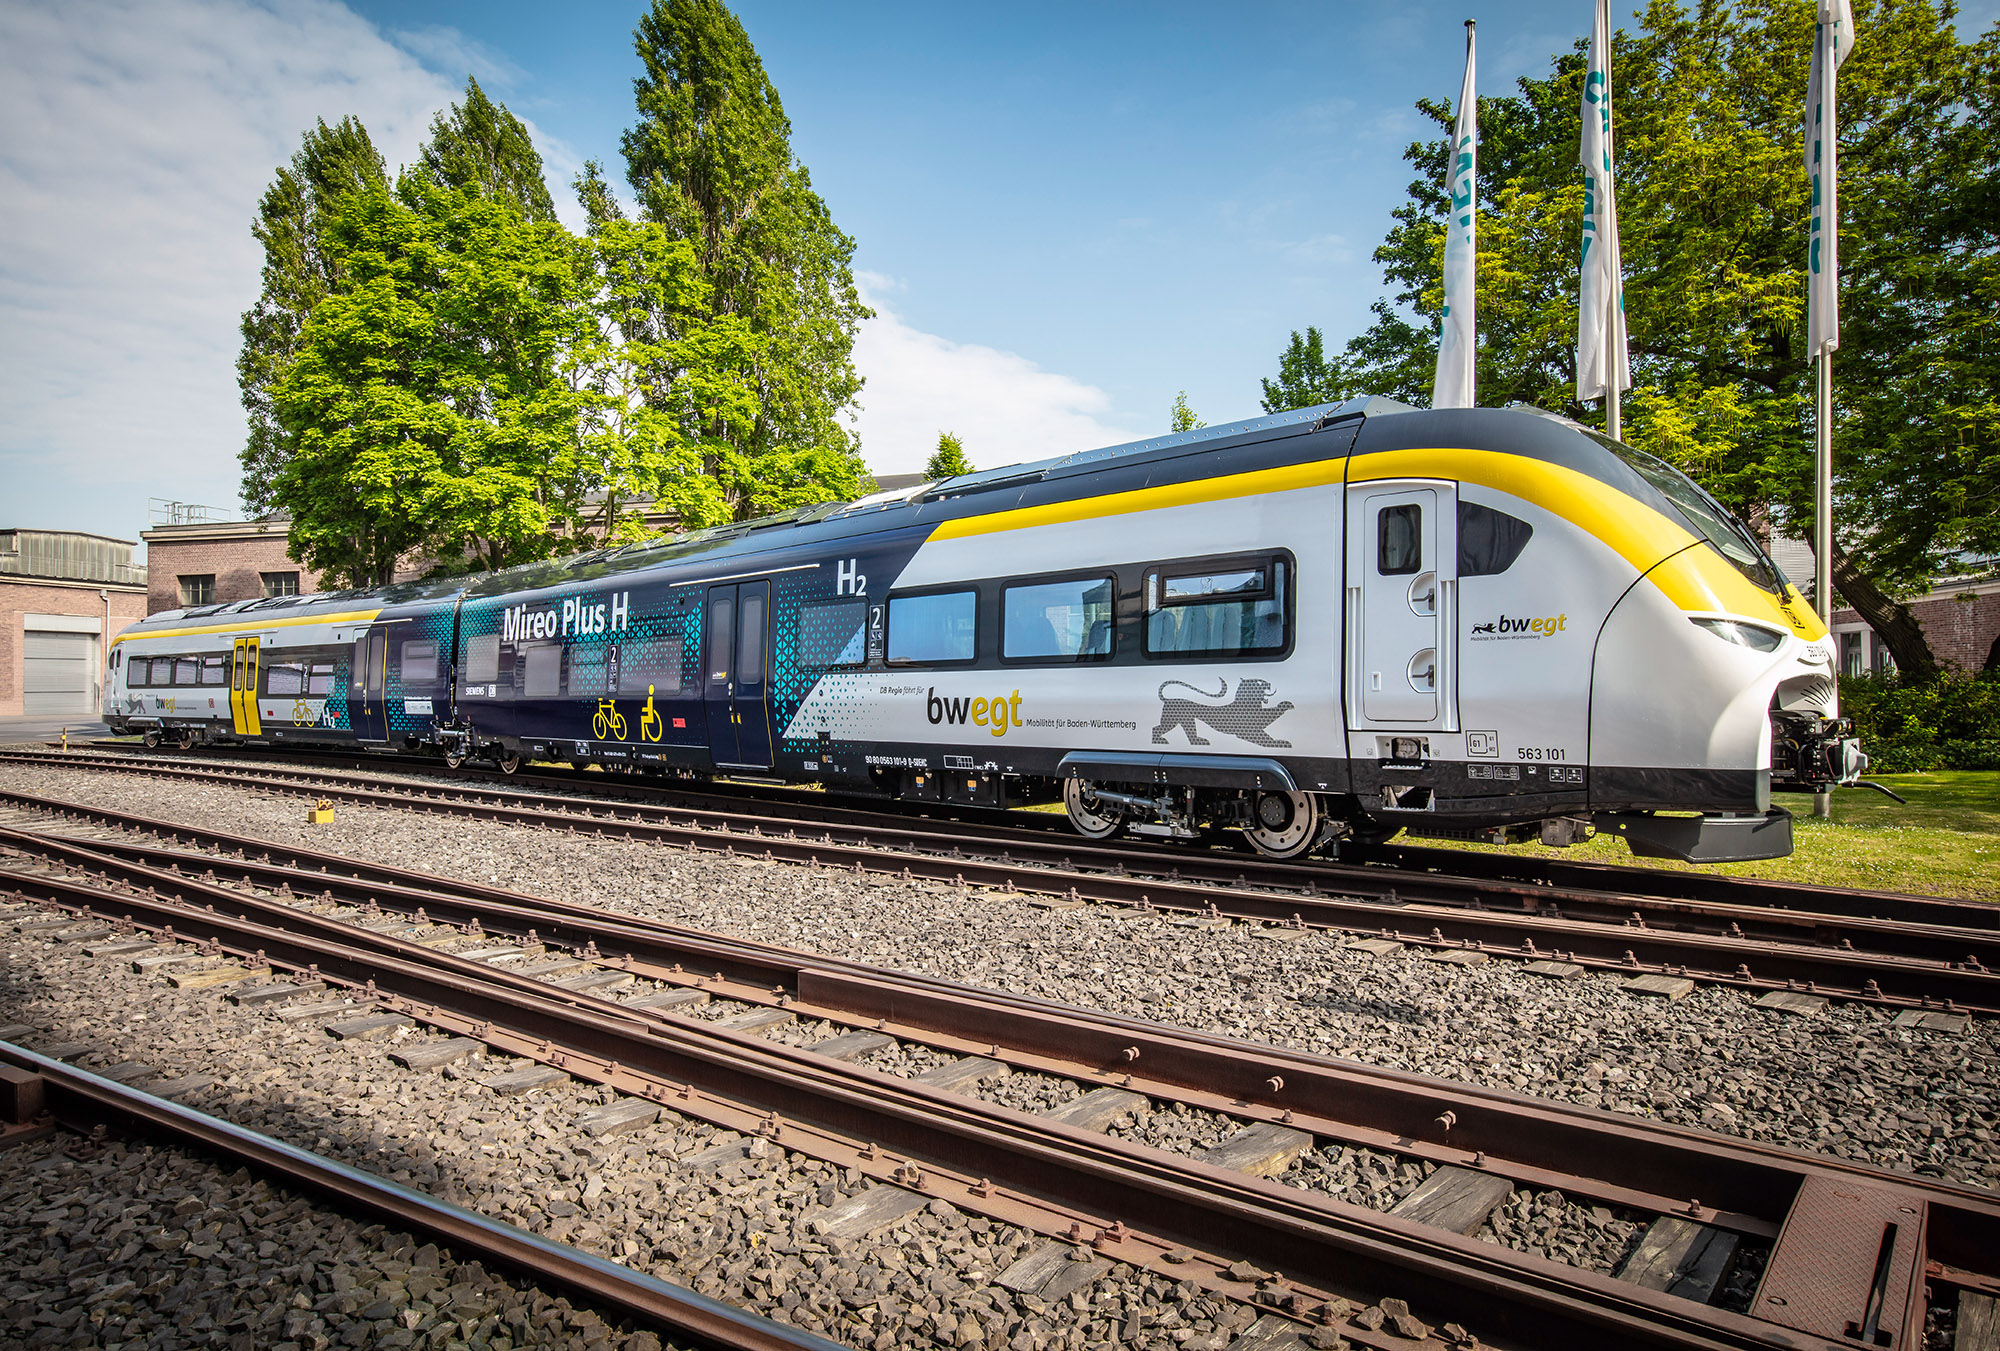 The Mireo Plus H hydrogen train at a plant in Krefeld